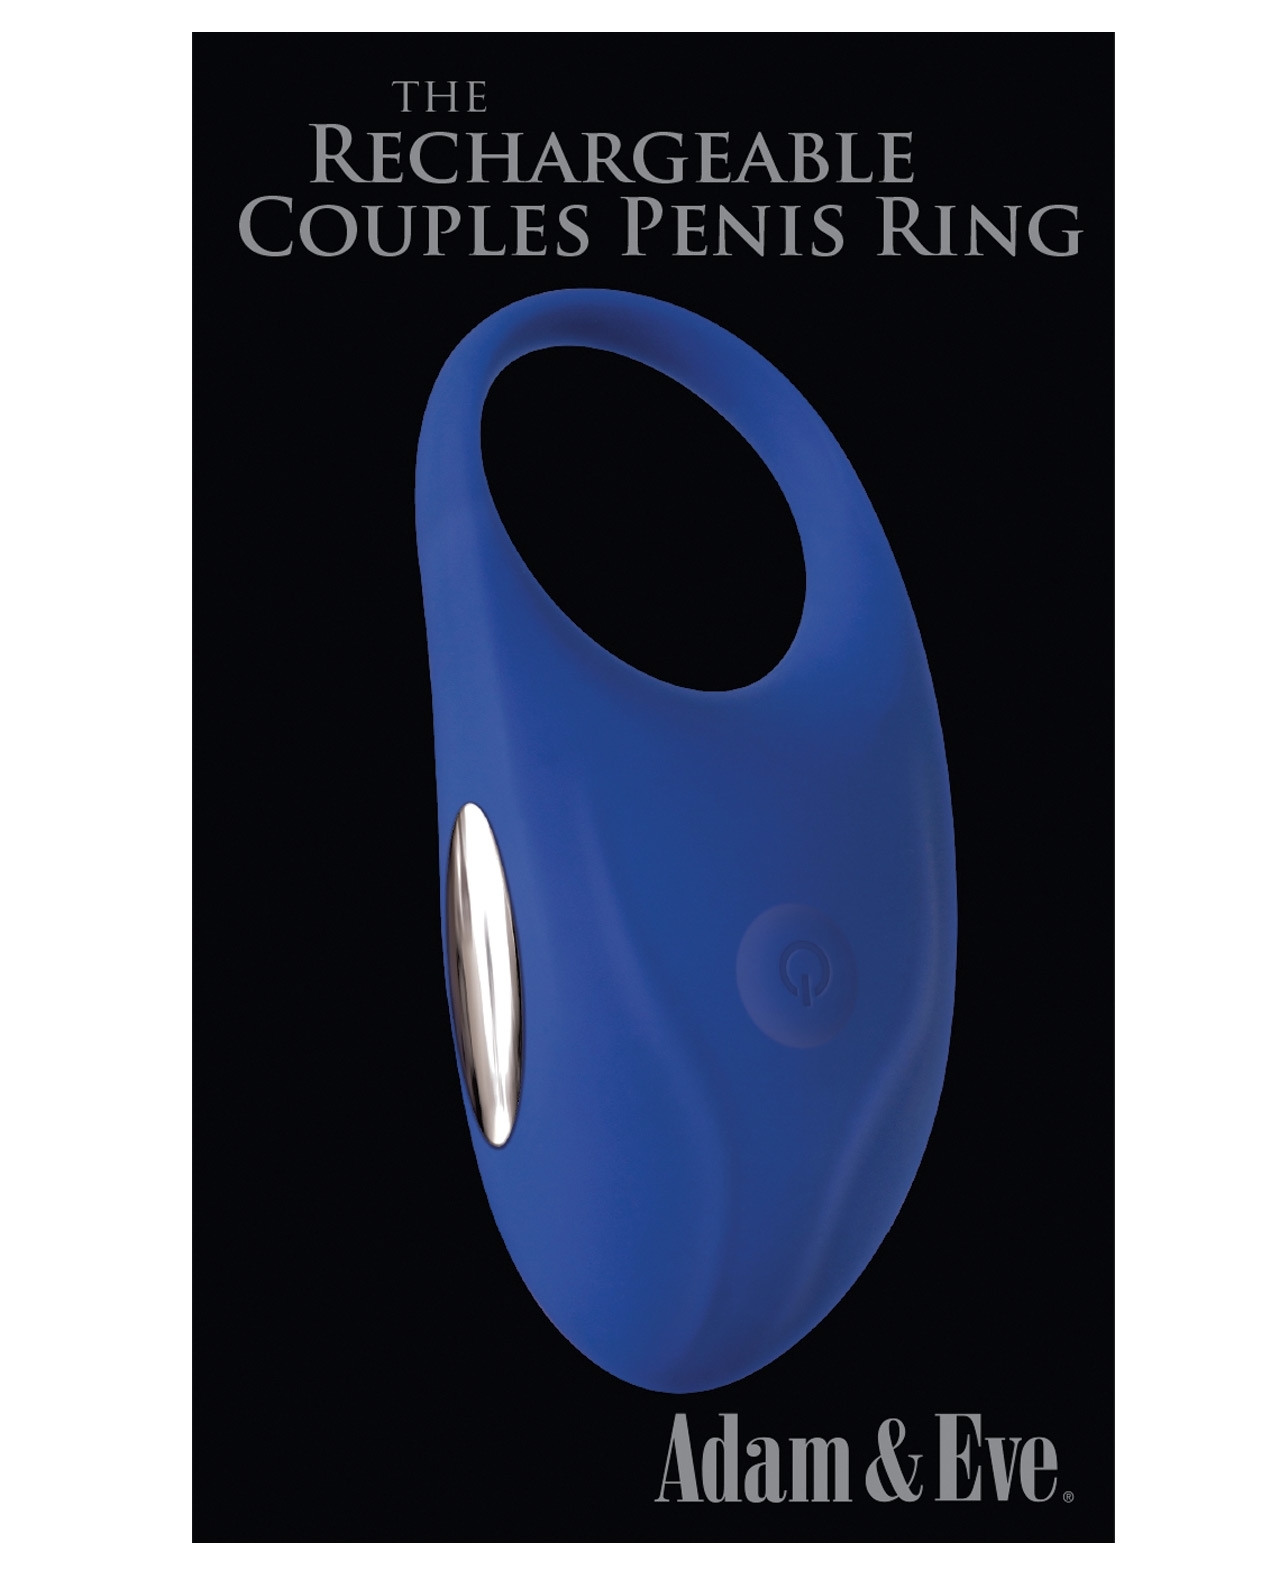 Adam & Eve Rechargeable Couples Penis Ring - Blue.